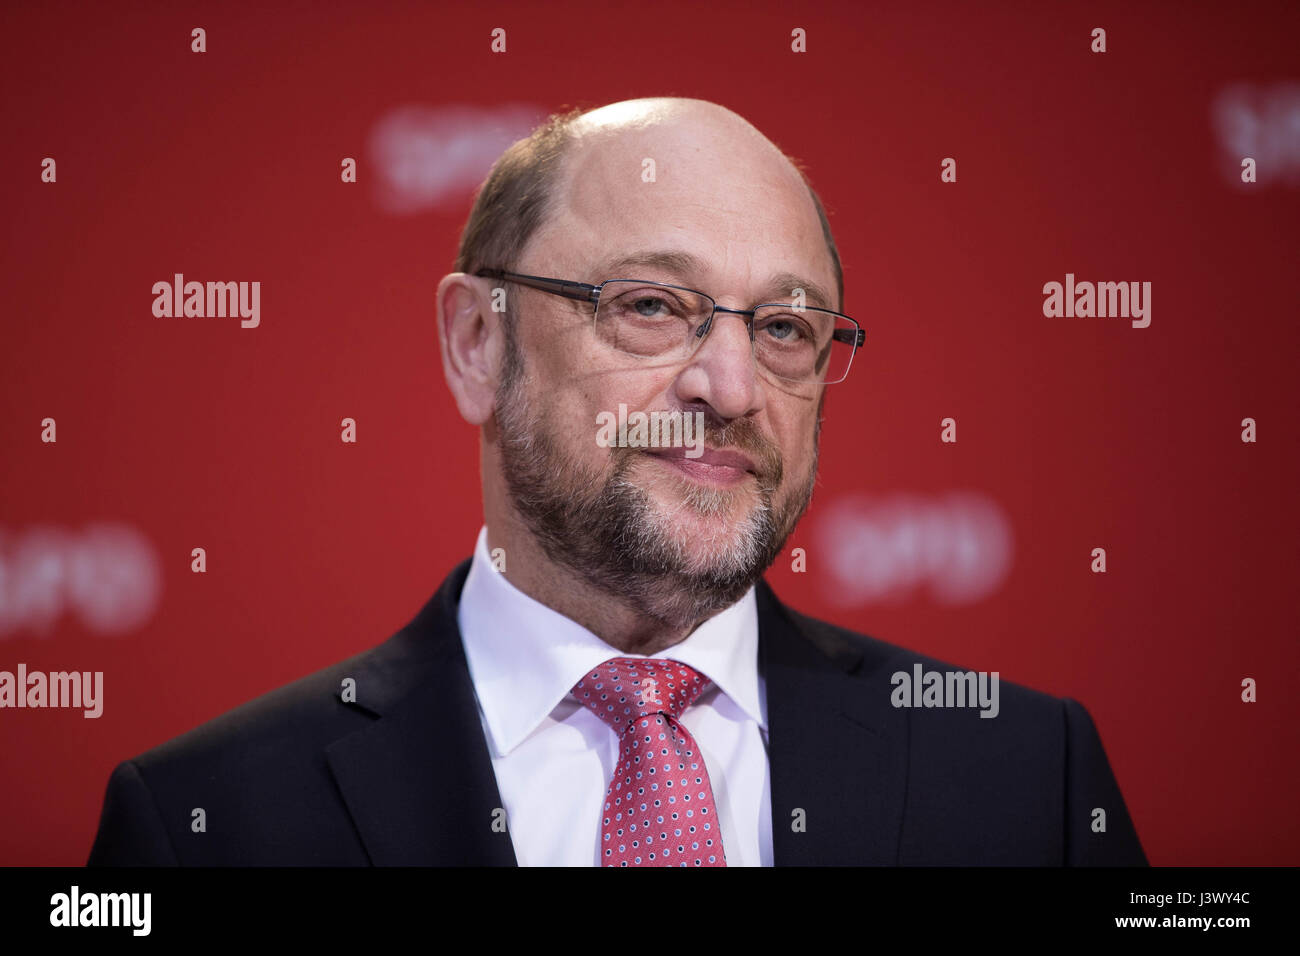 SPD leader Martin Schulz (SPD) speaking about the Schleswig-Holstein state election results at the Willy-Brandt-Haus in Berlin, Germany, 7 May 2017. Photo: Jörg Carstensen/dpa Stock Photo